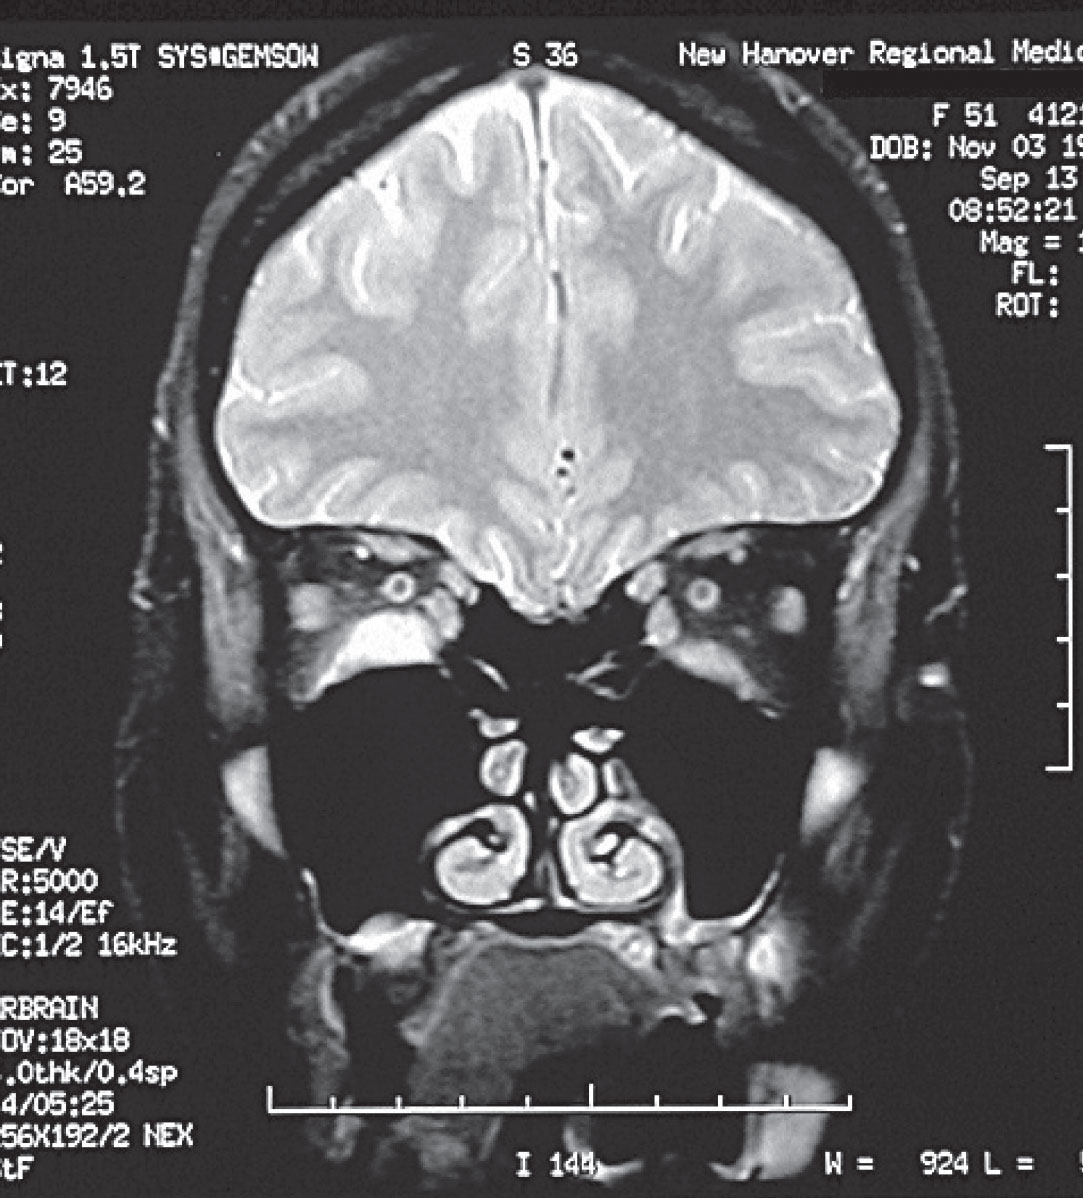 A coronal MRI of the orbits in a patient with Graves’ disease, demonstrating enlargement of the inferior recti muscles, right > left.